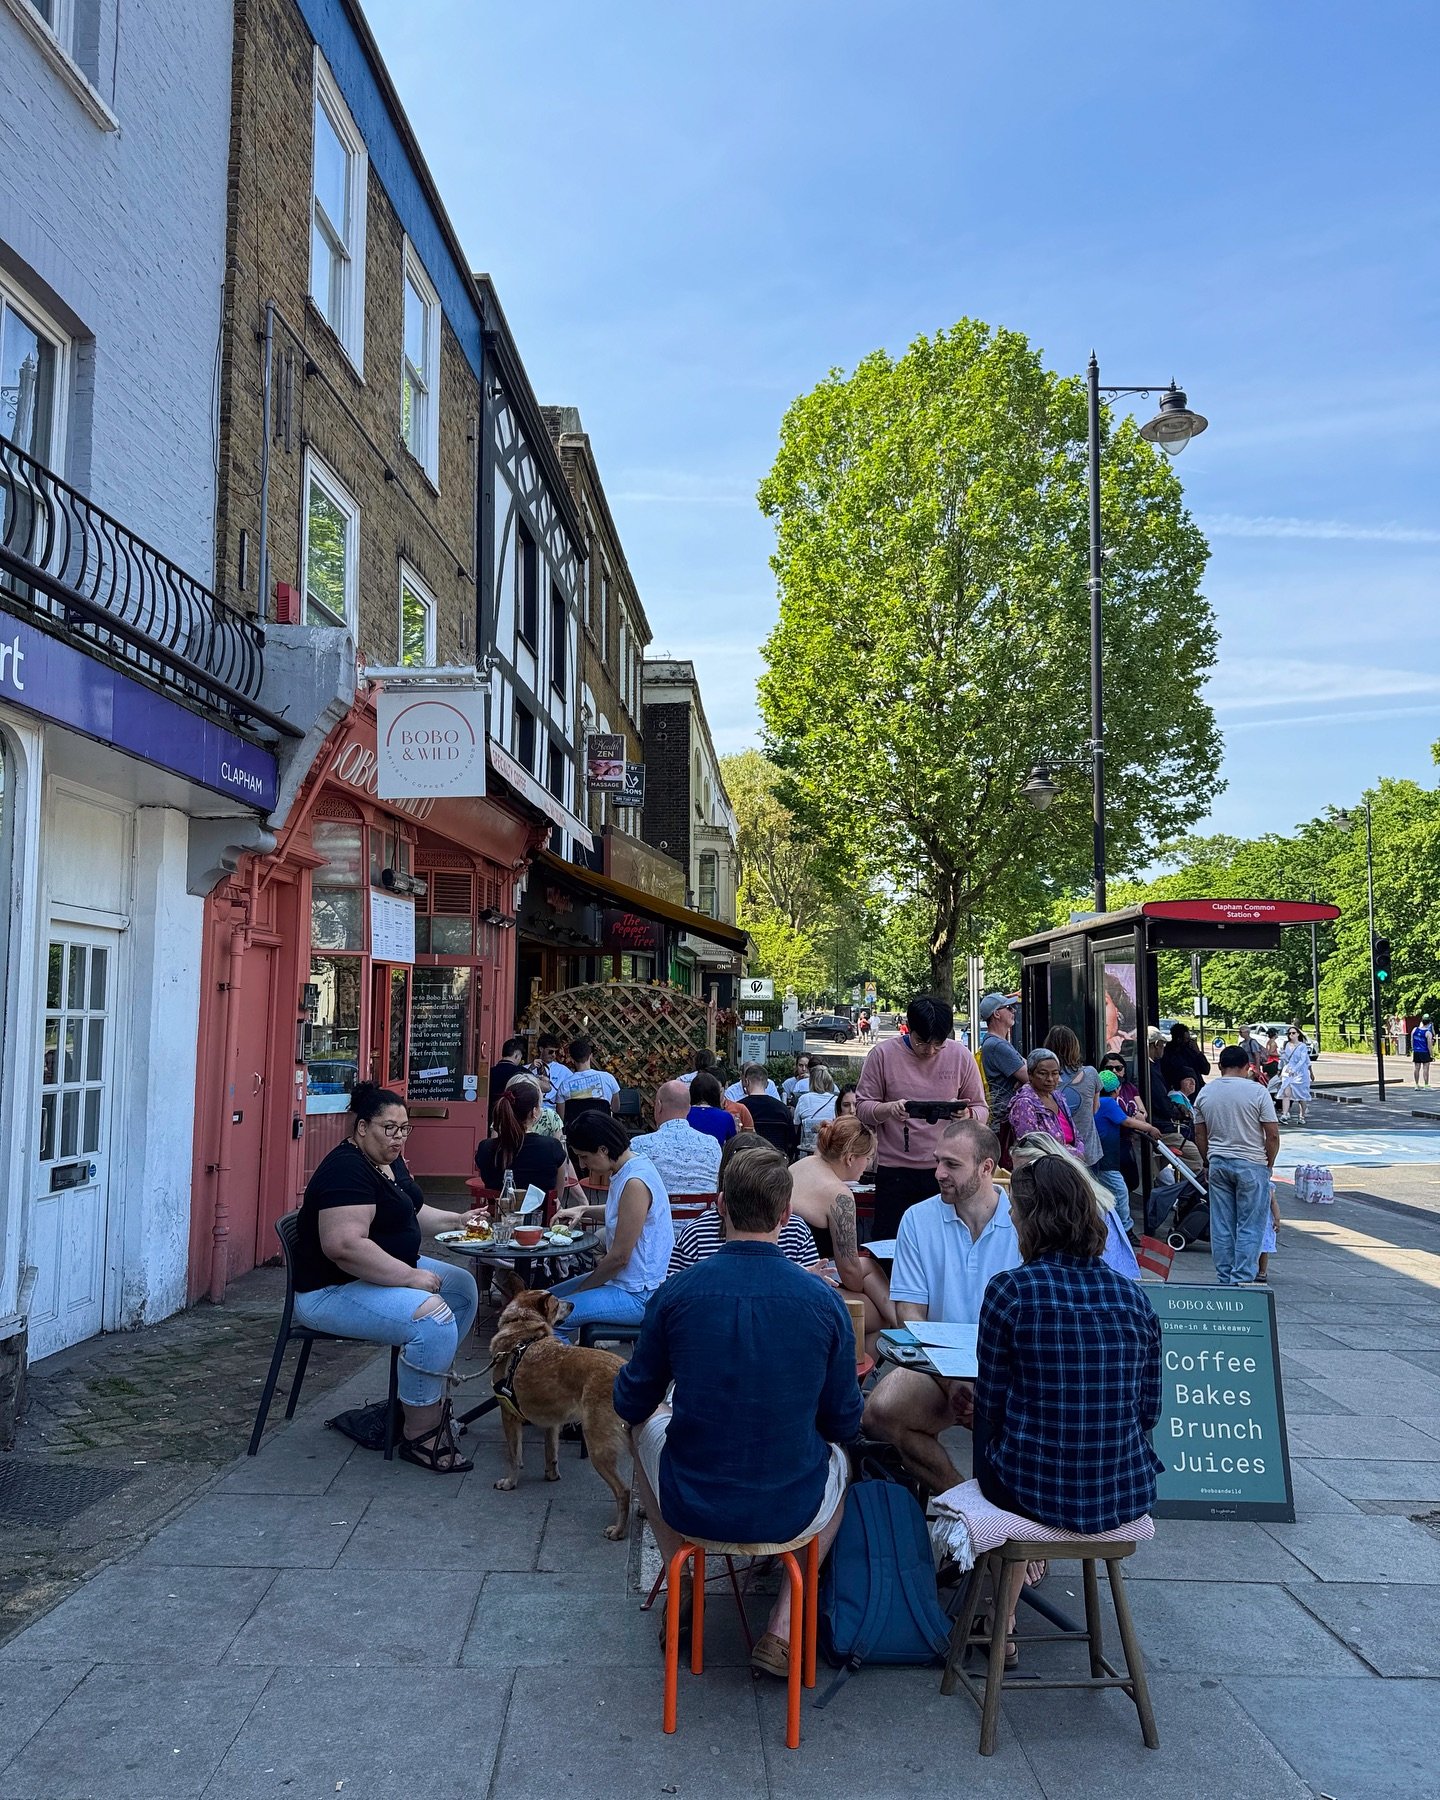 Lazy Sunday afternoons are best spent here! ☕🌿 Our outdoor seating is ready for you to unwind and enjoy the day.

#clapham #claphamcommon #londonfoodie #brunch